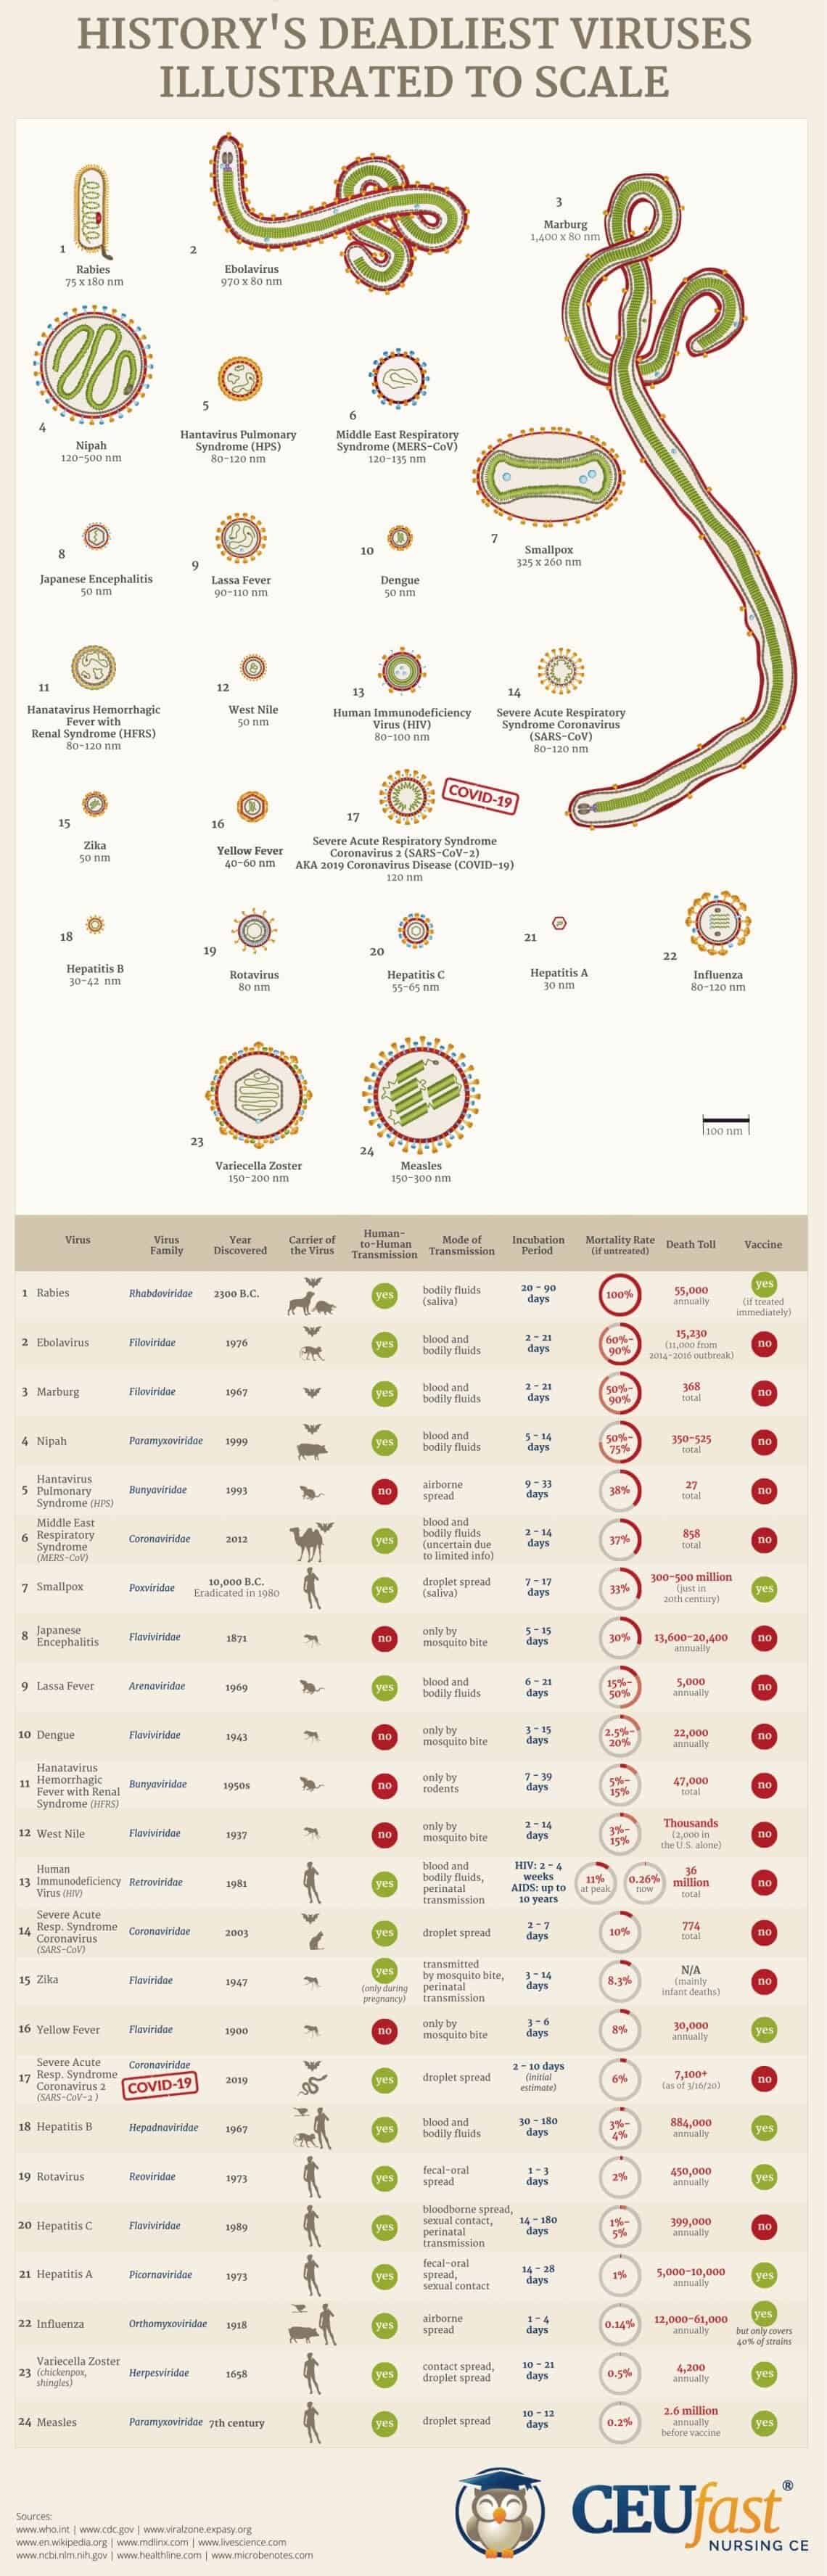 How Does the Coronavirus Compare to the Deadliest Viruses in History